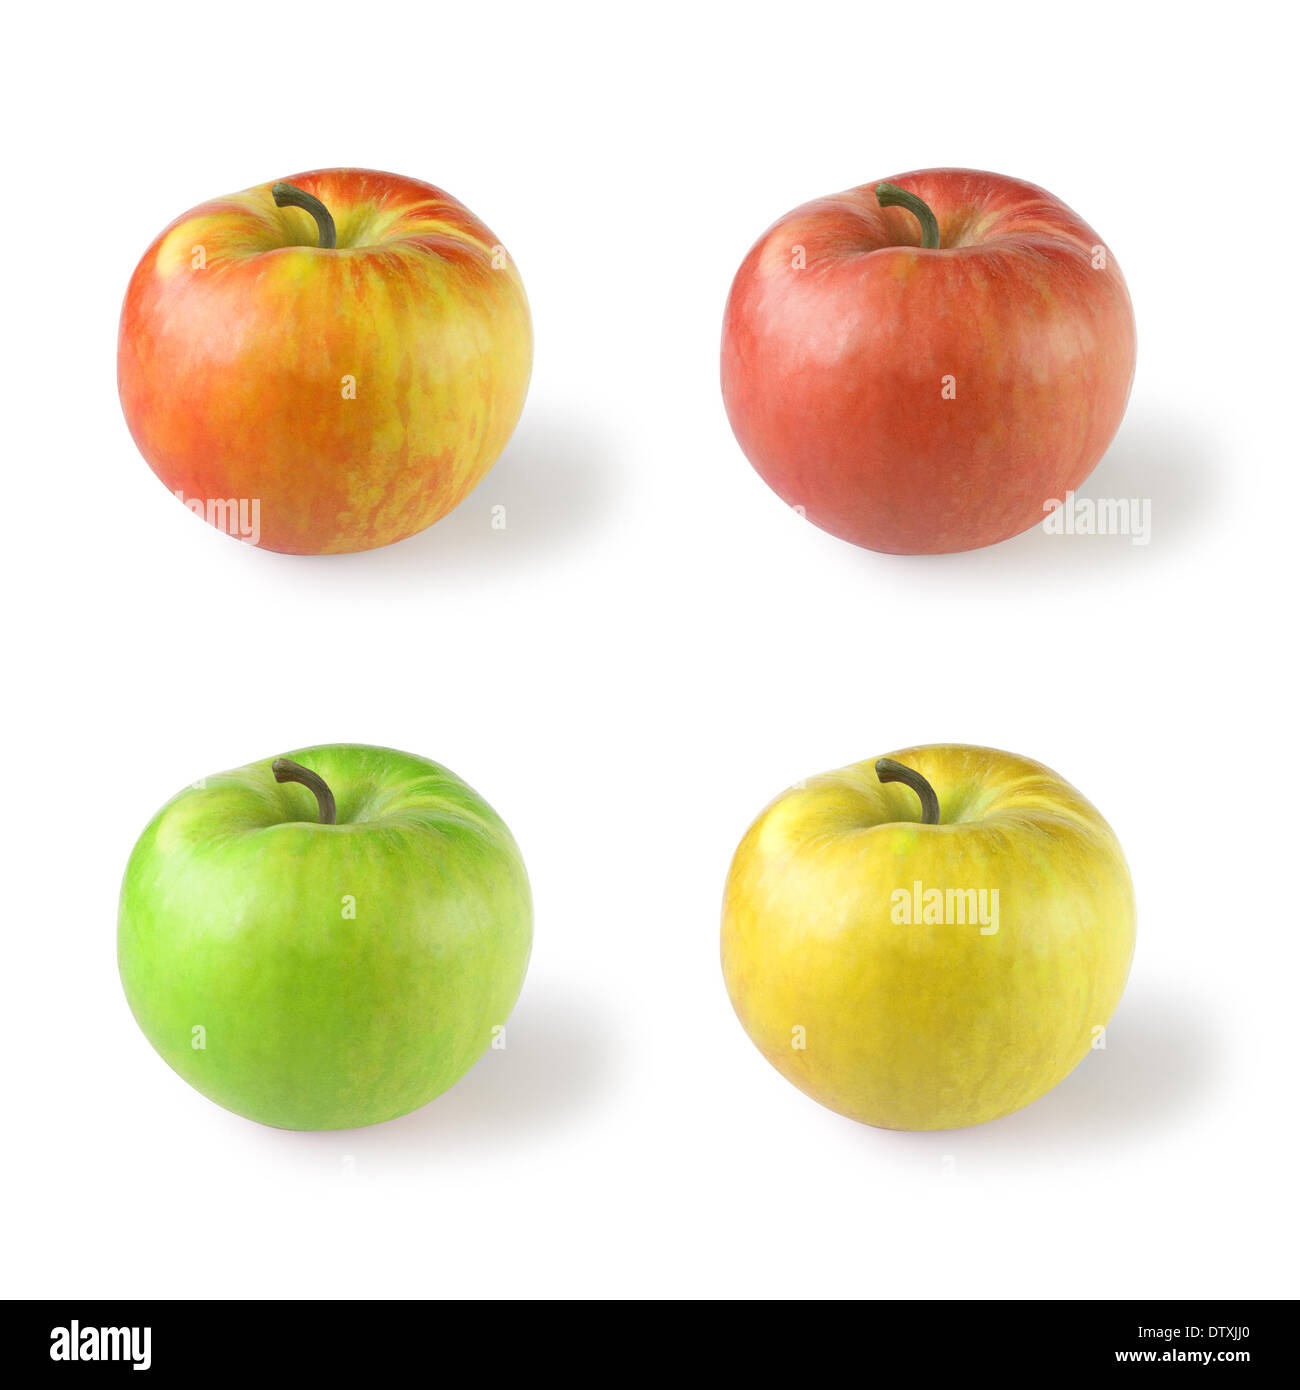 Four apples (variations of color) Stock Photo